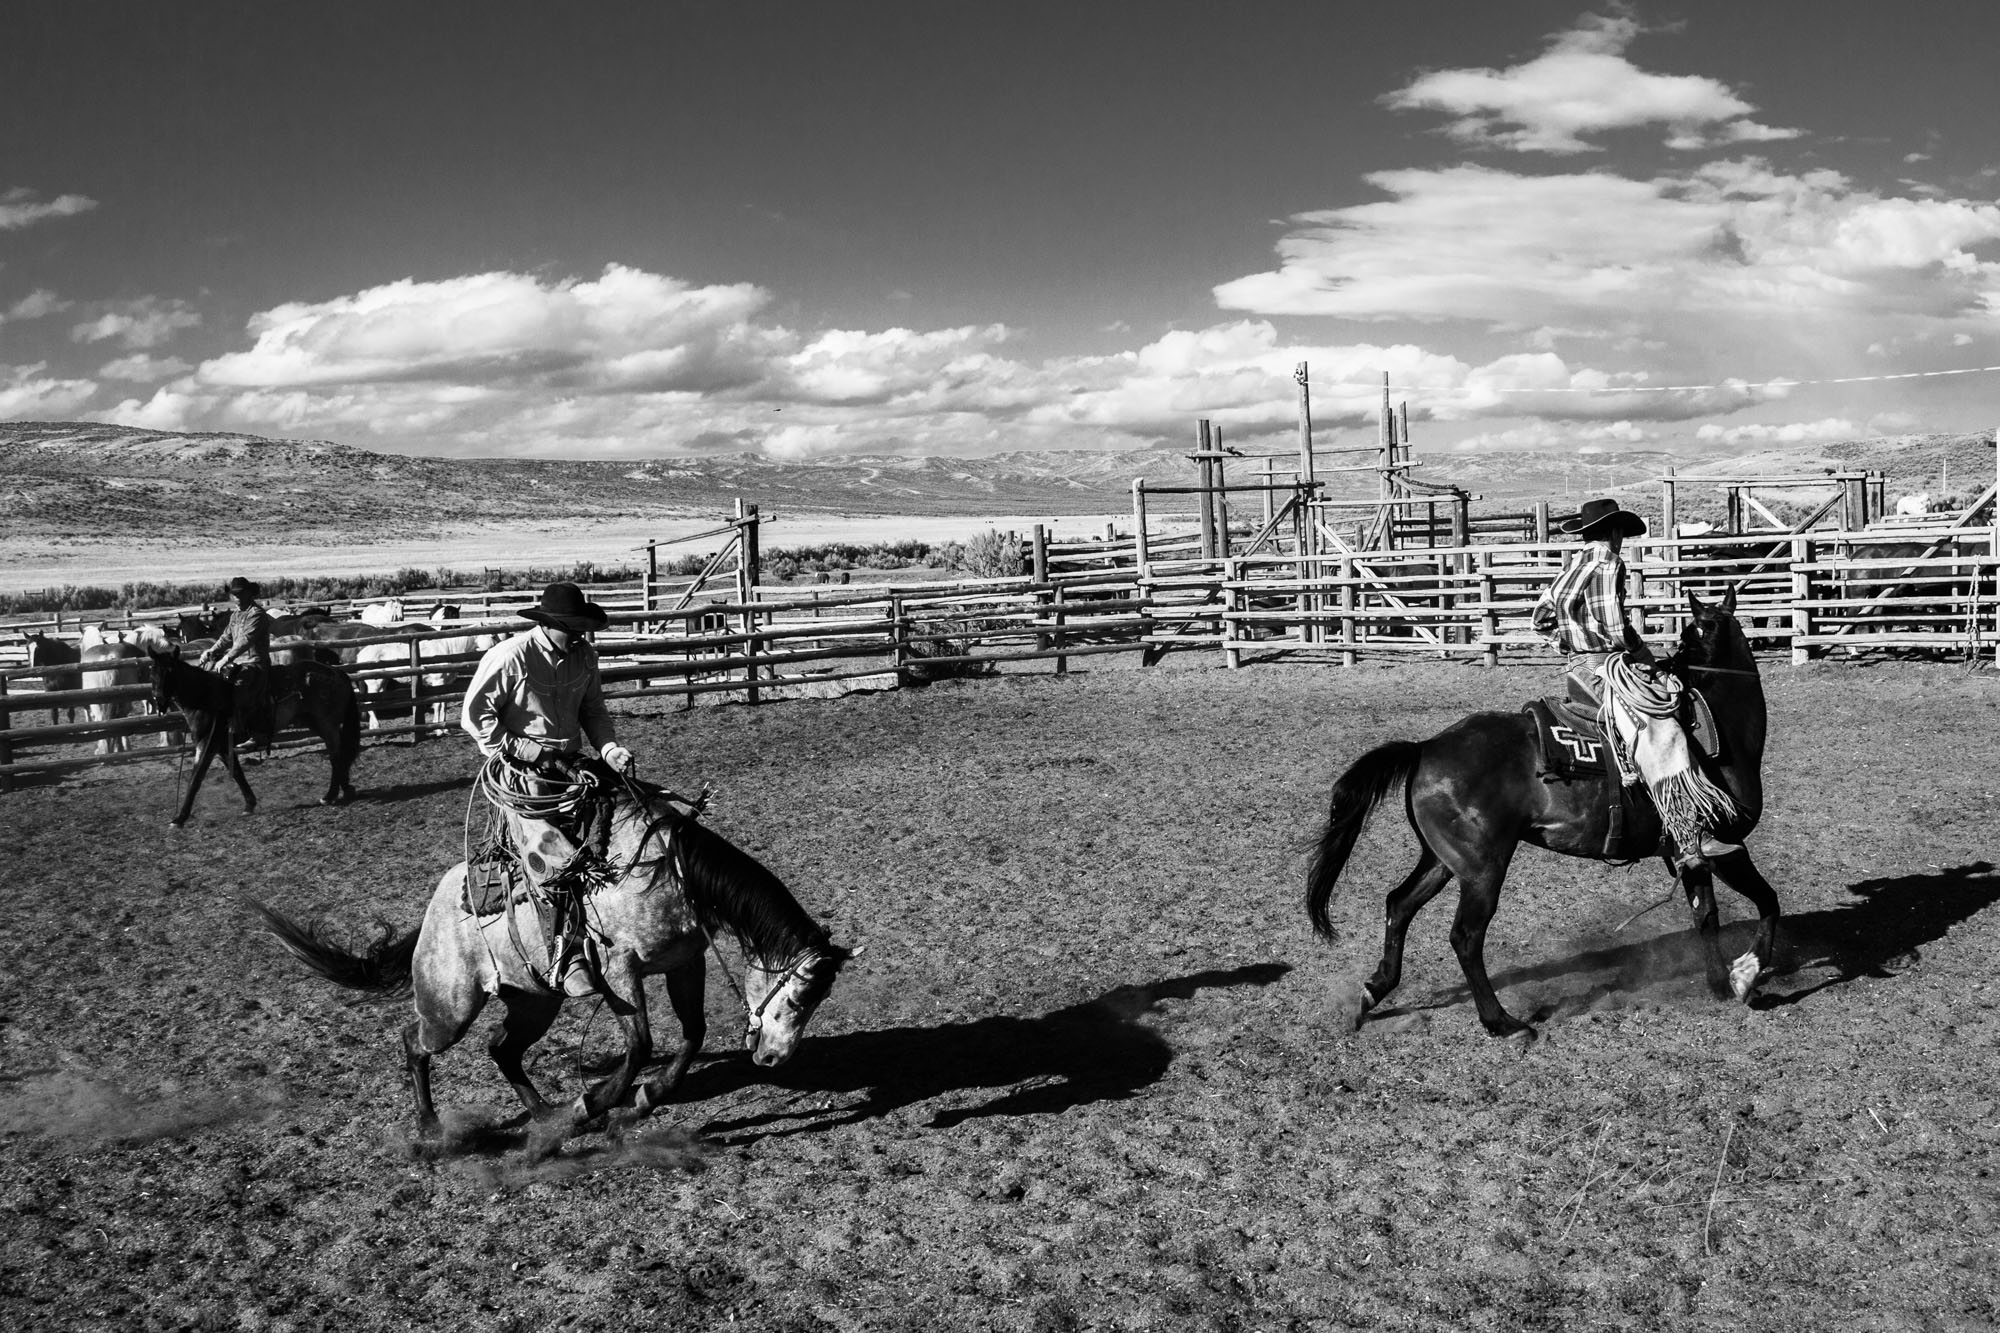 Fine Art Limited Edition Photo Prints of Cowboys, Horses, and life in the West. Crow Hopper. A Cowboy picture in black and white...